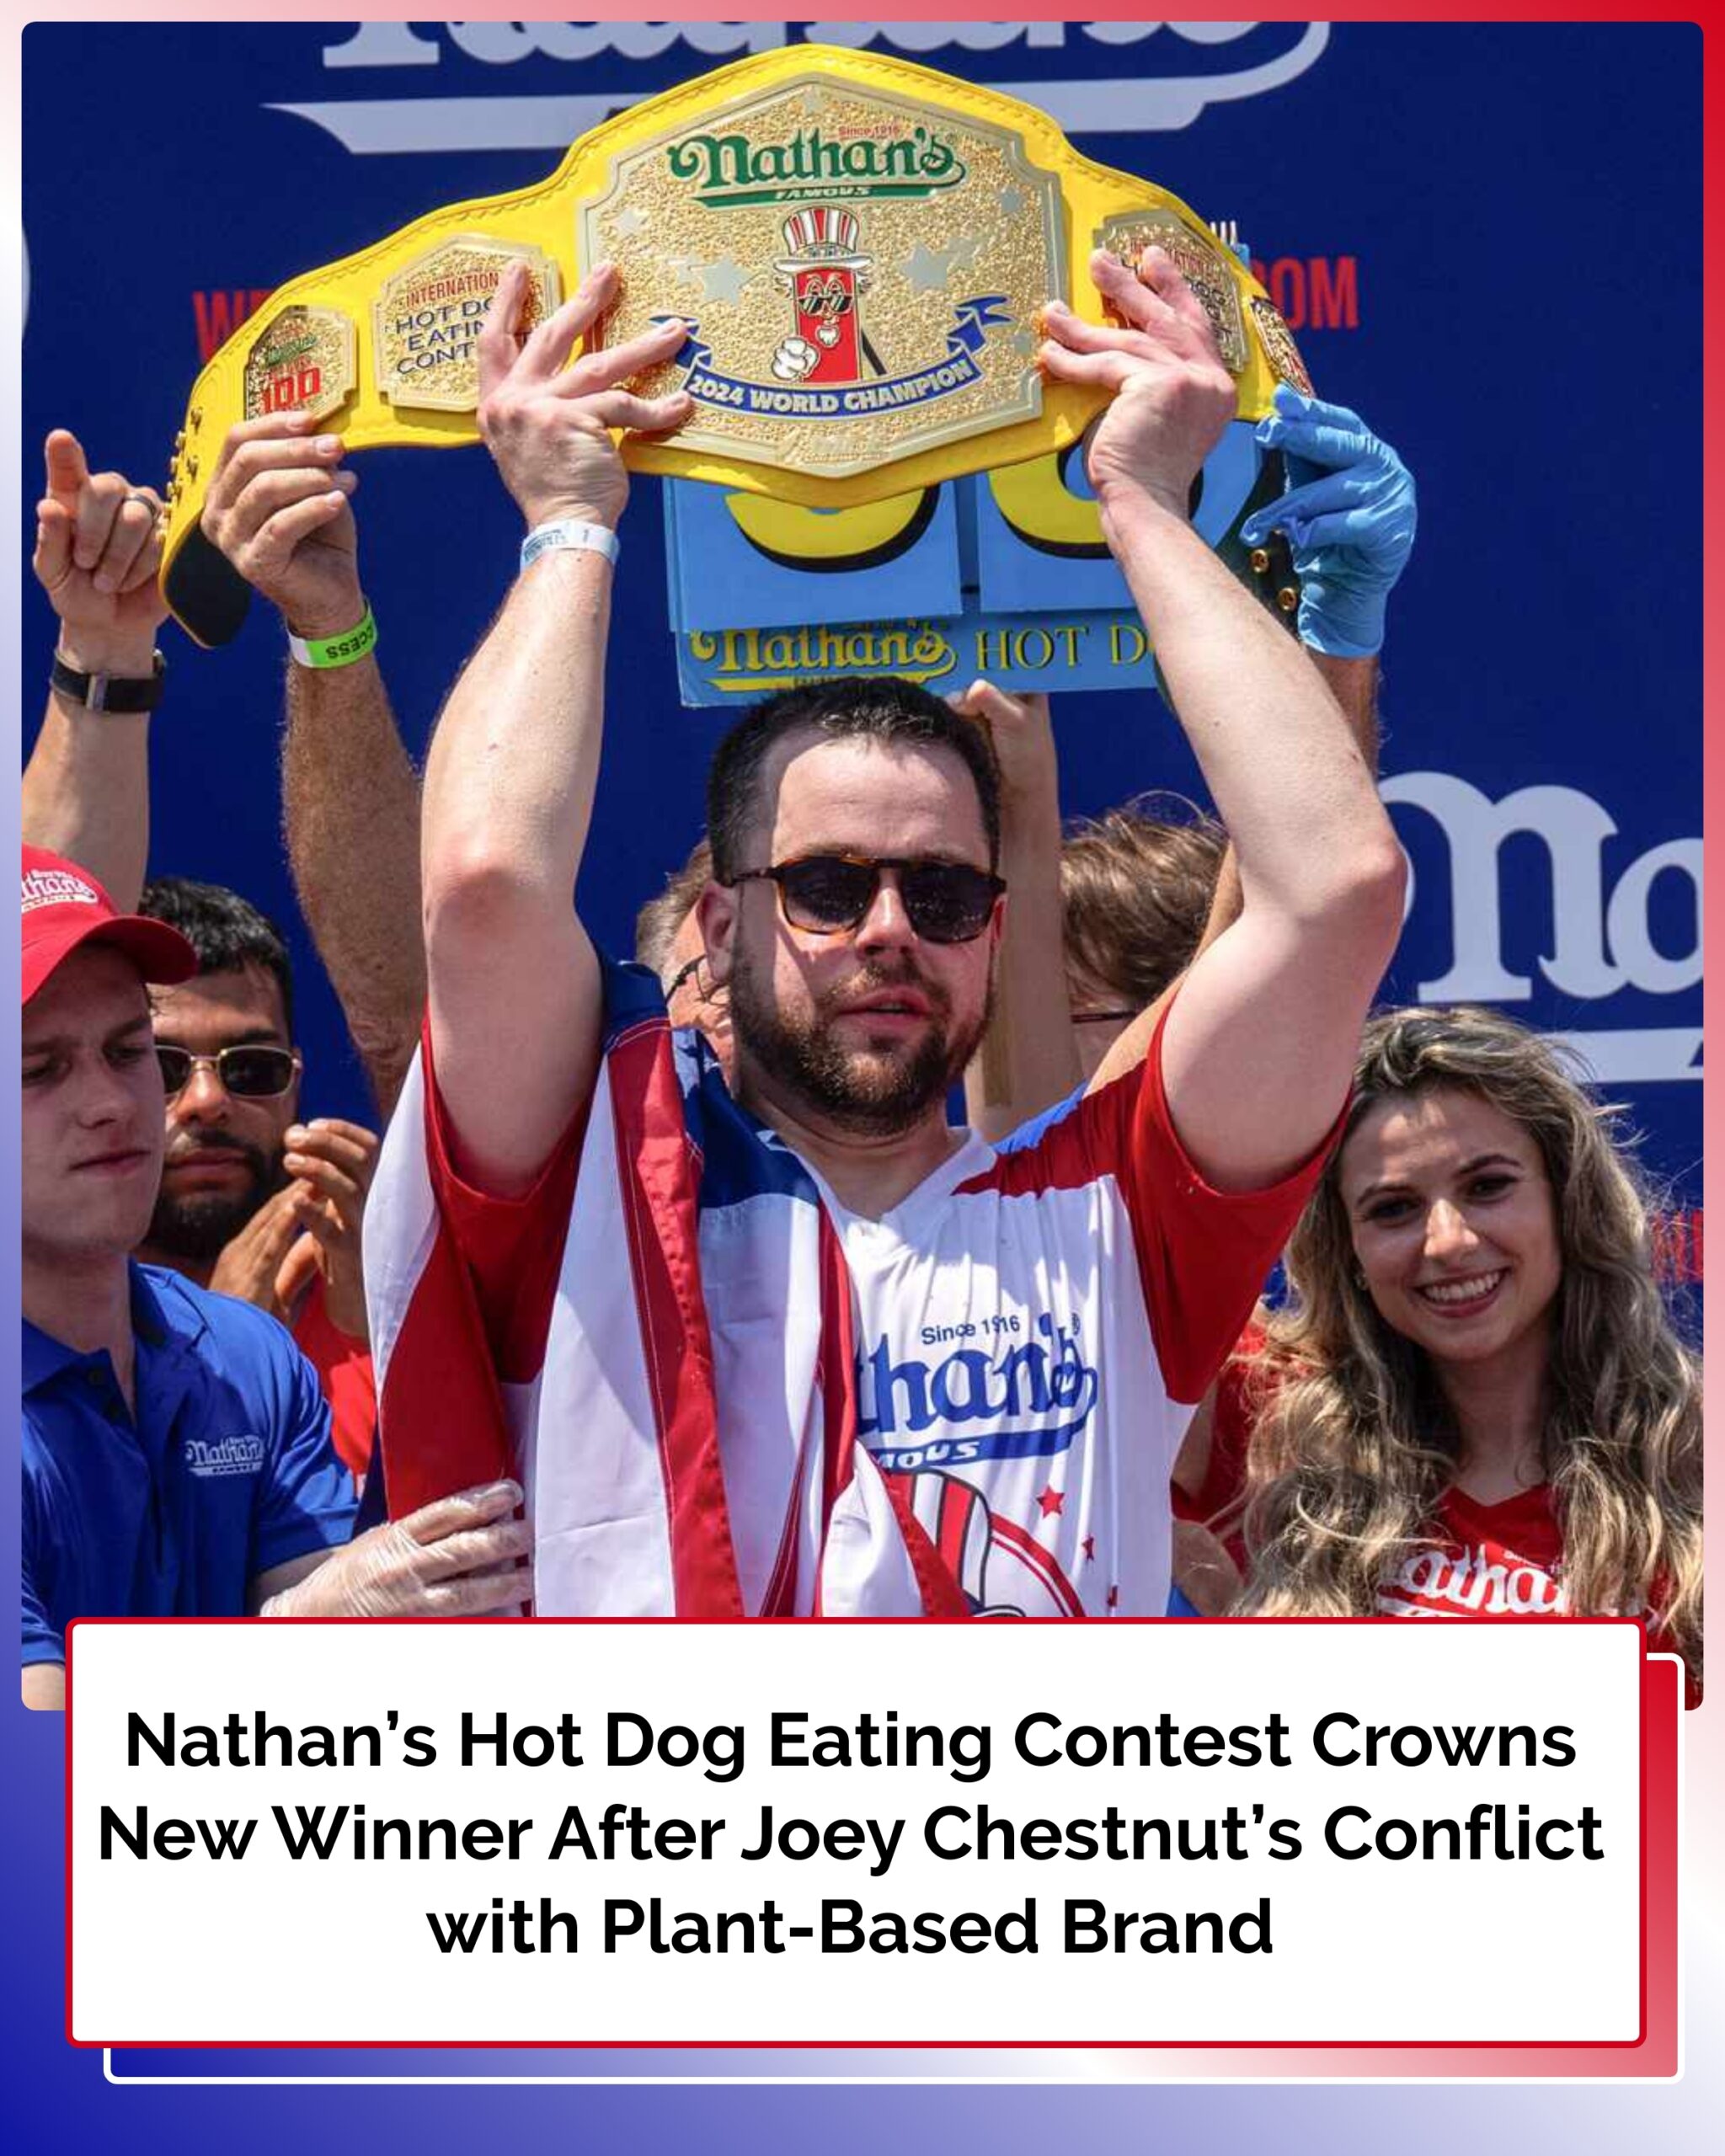 Nathan’s Hot Dog Eating Contest Crowns New Winner After Joey Chestnut’s Conflict with Plant-Based Brand